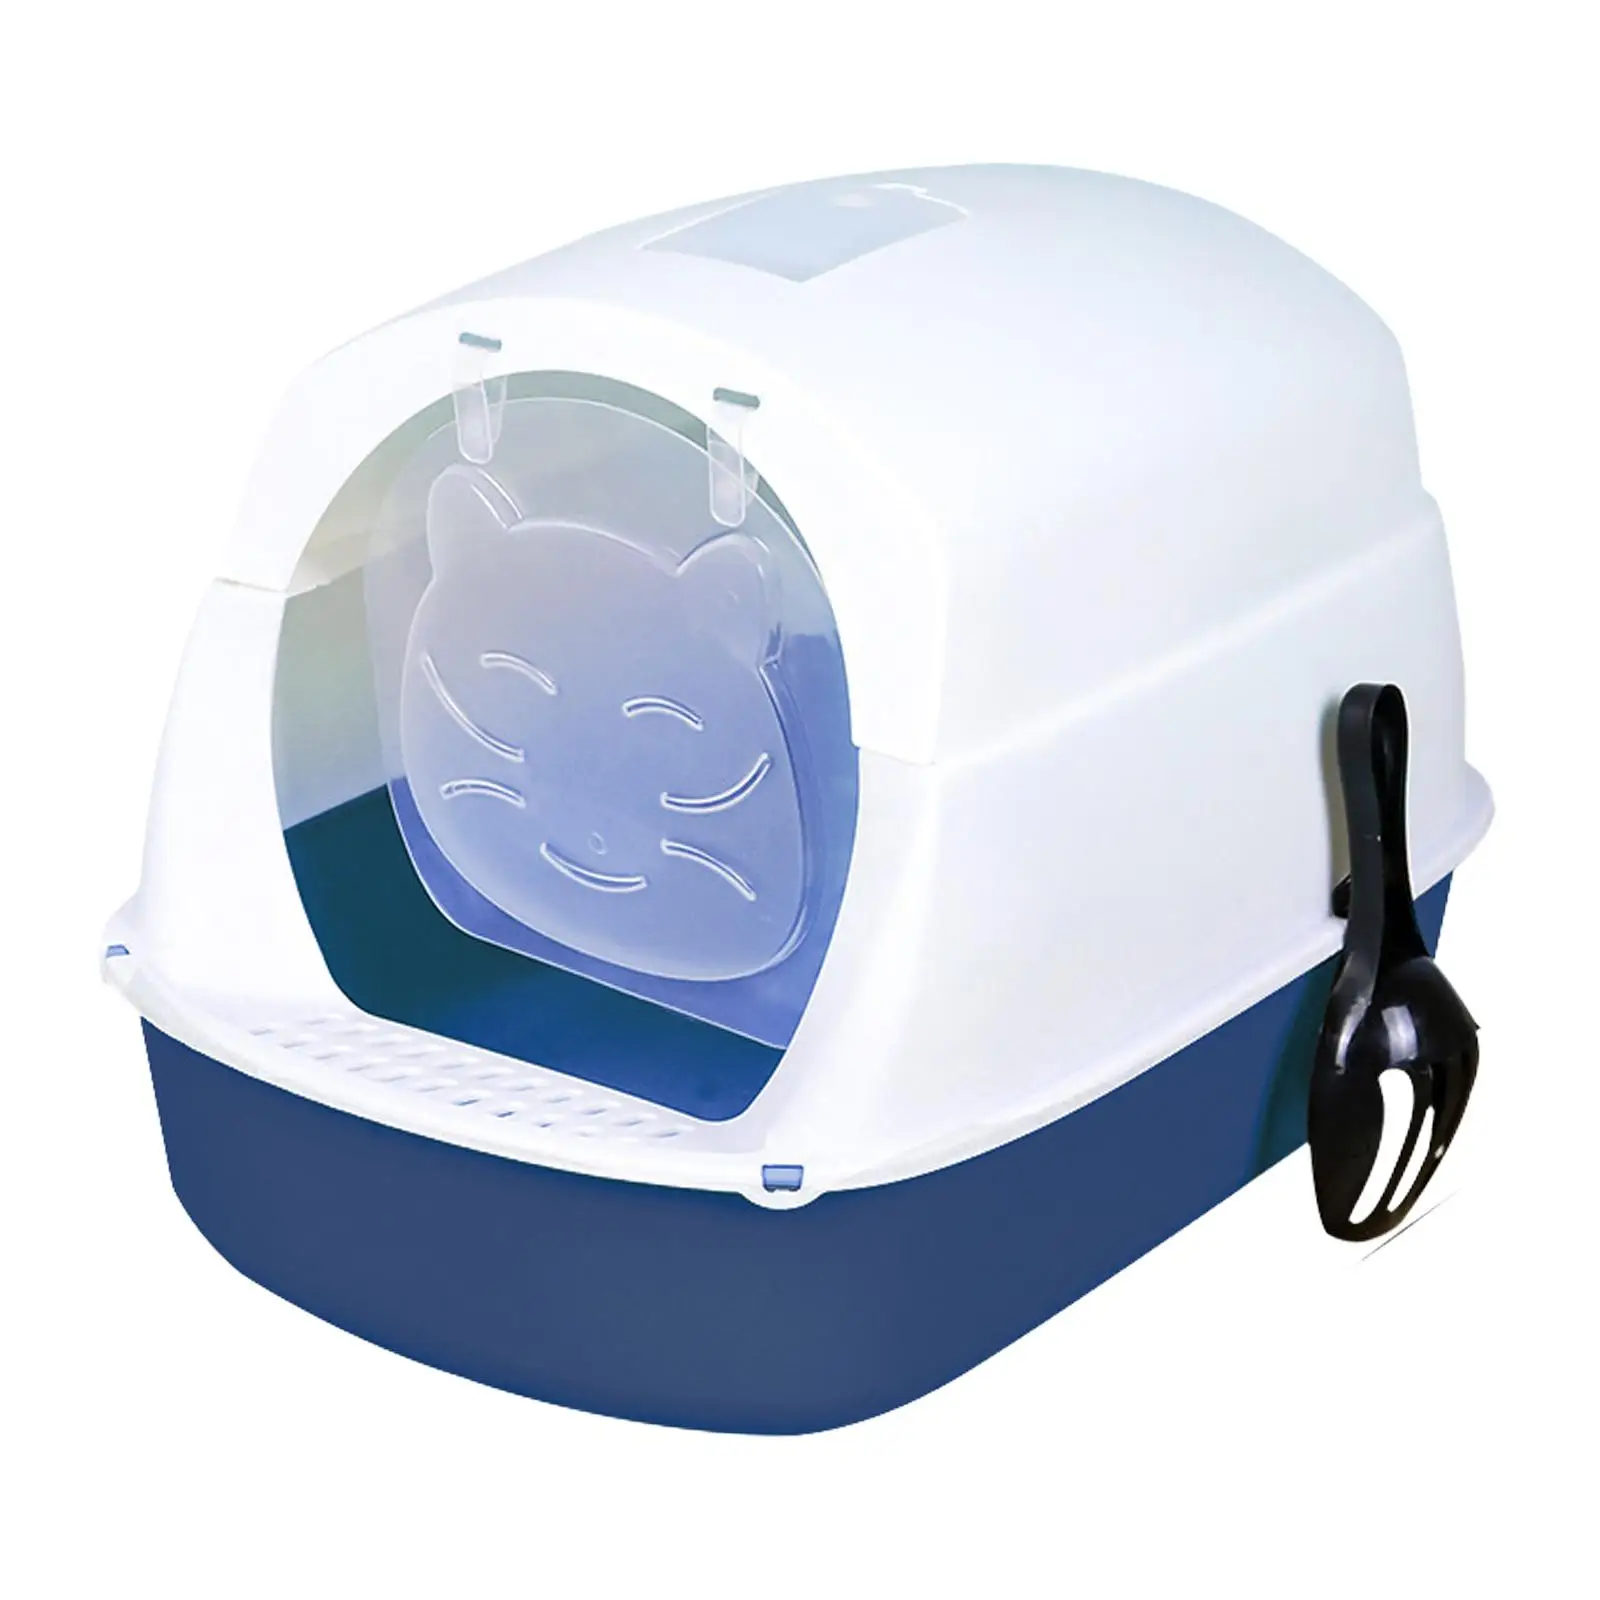 Hooded Cat Litter Box Enclosed and Covered Cat Toilet with Front Door Flap Removable Kitten Potty Kitty Litter Tray Pet Supplies